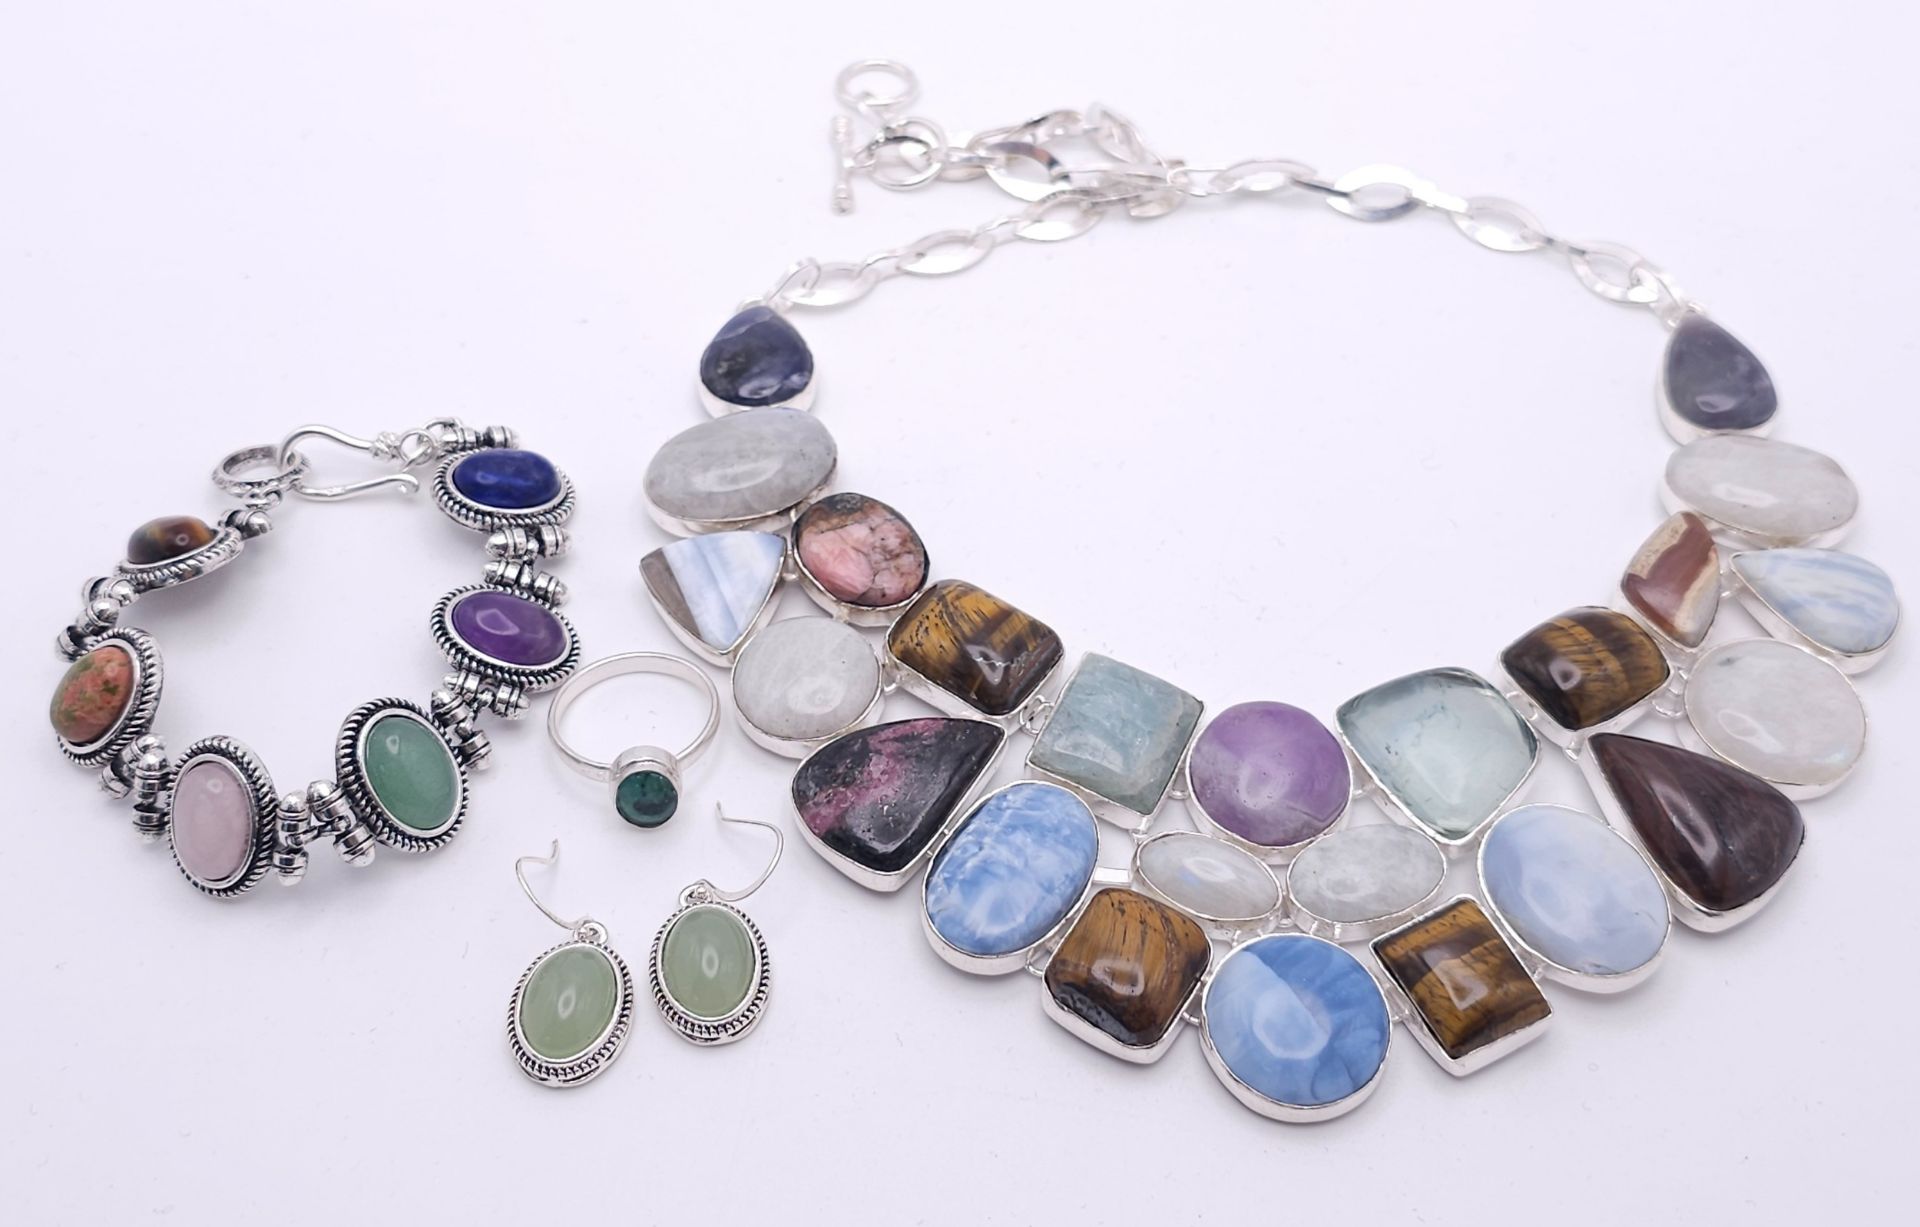 A Multi Gemstone 925 Silver Bracelet - 17cm, and Necklace - 42cm. Also comes with a pair of earrings